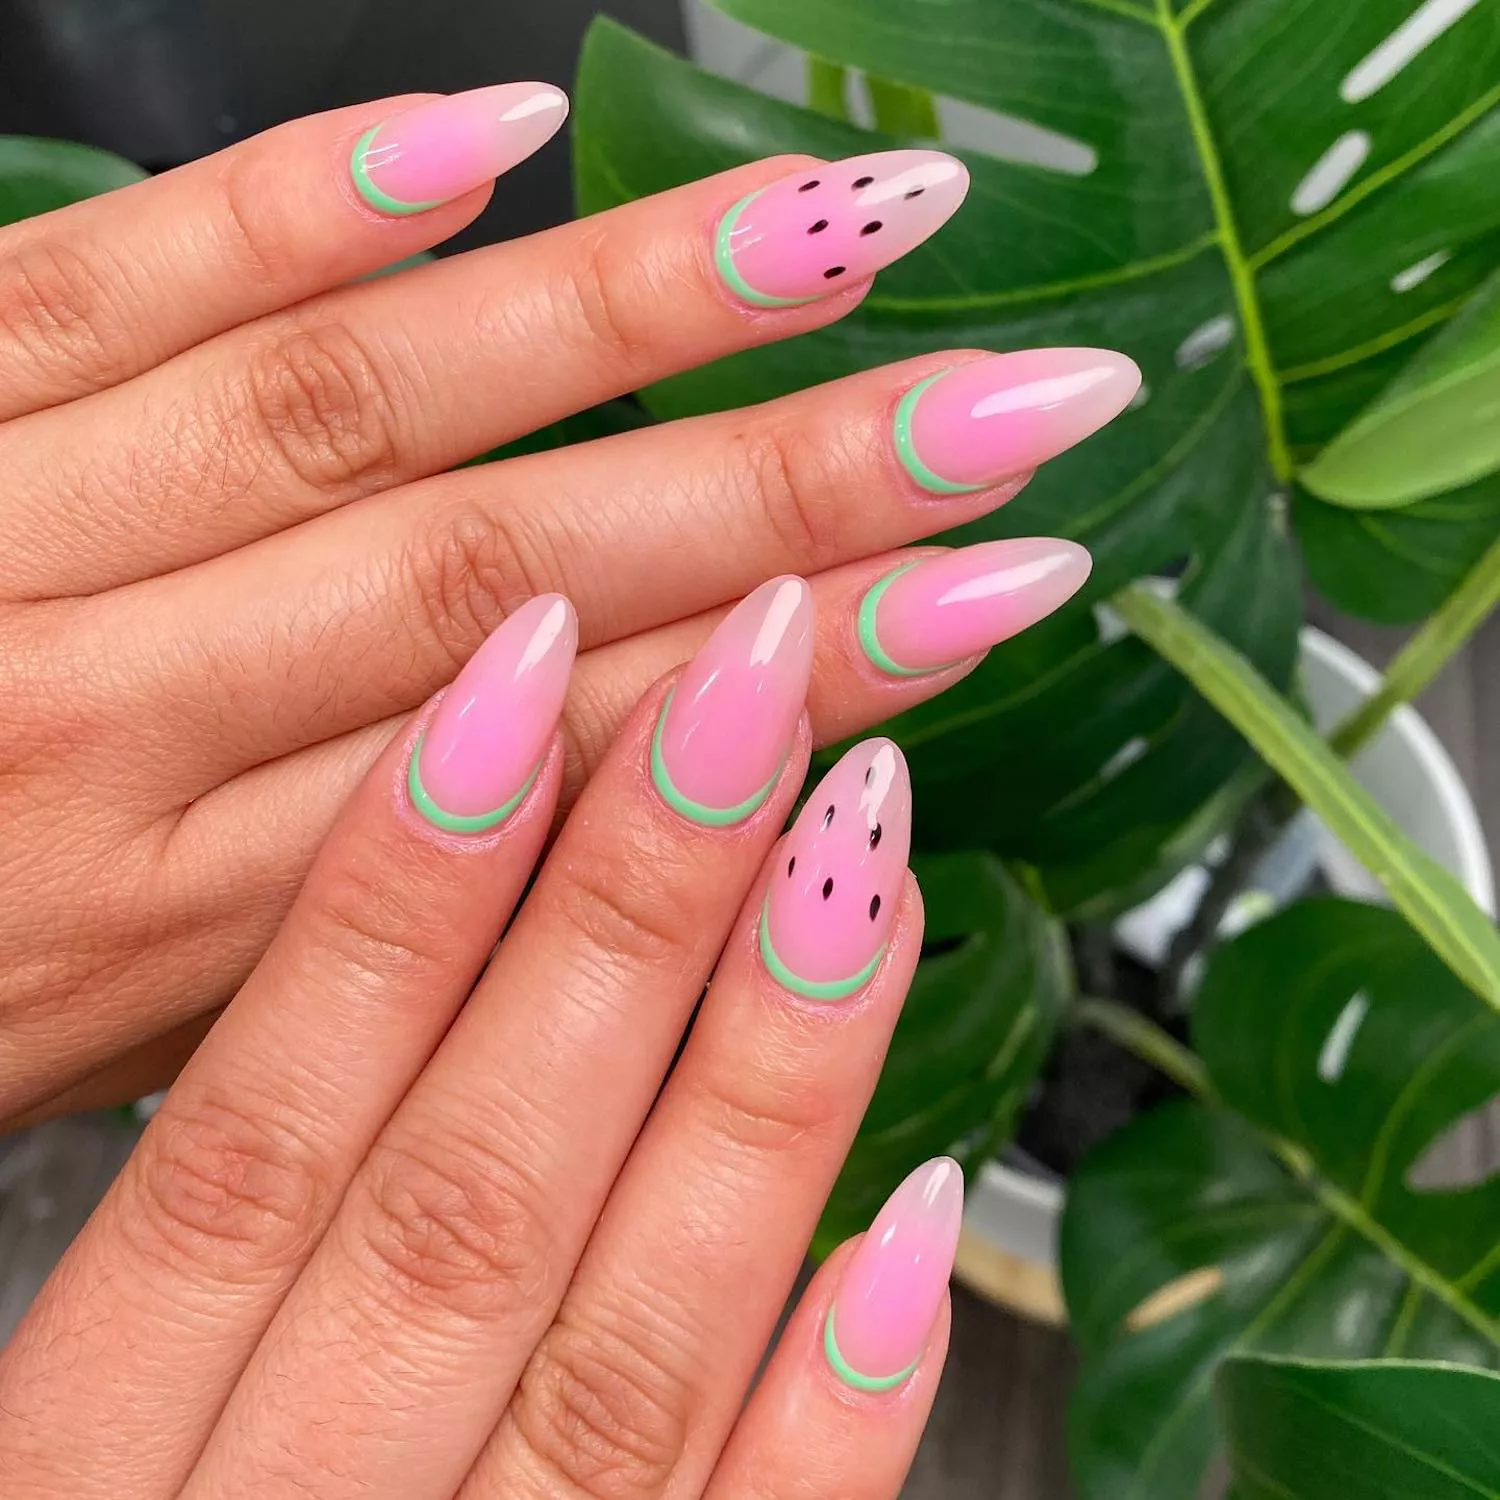 Translucent pink ombre watermelon nails with black dotted seed design and green cuticle rinds